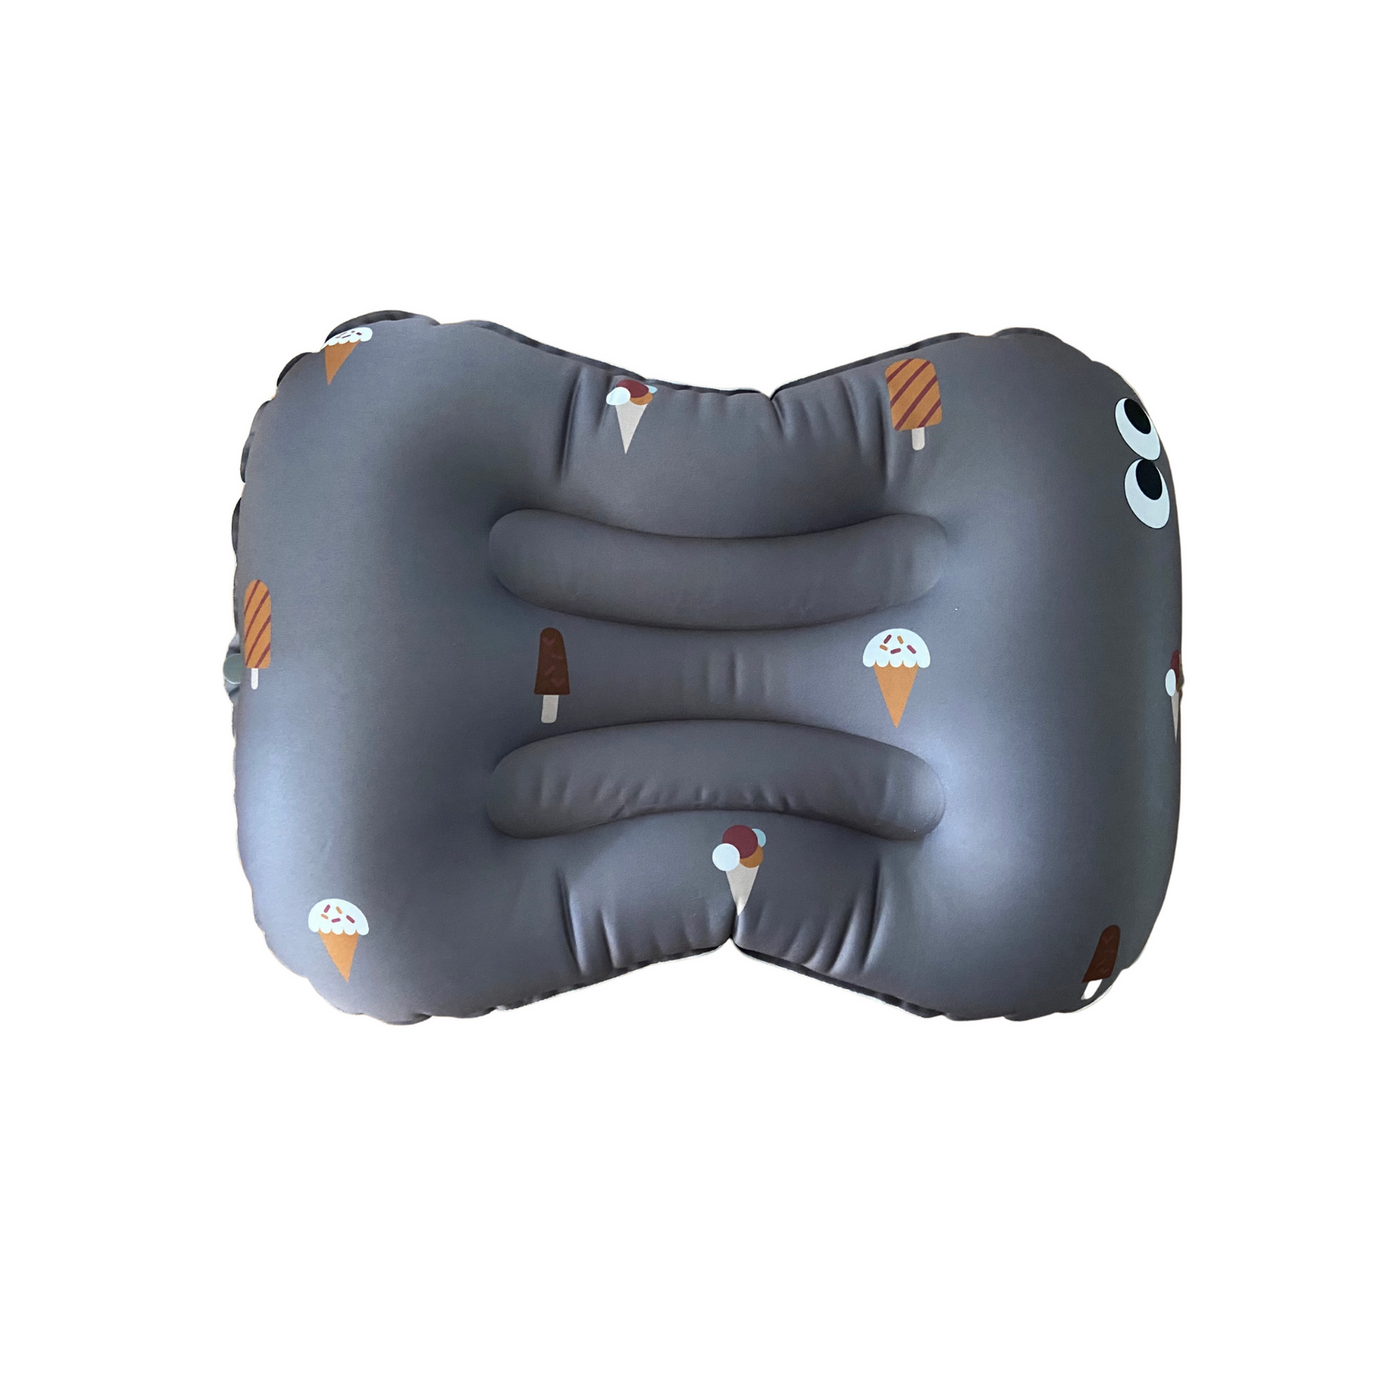 Have a seat (inflatable cushion) - multiple colours